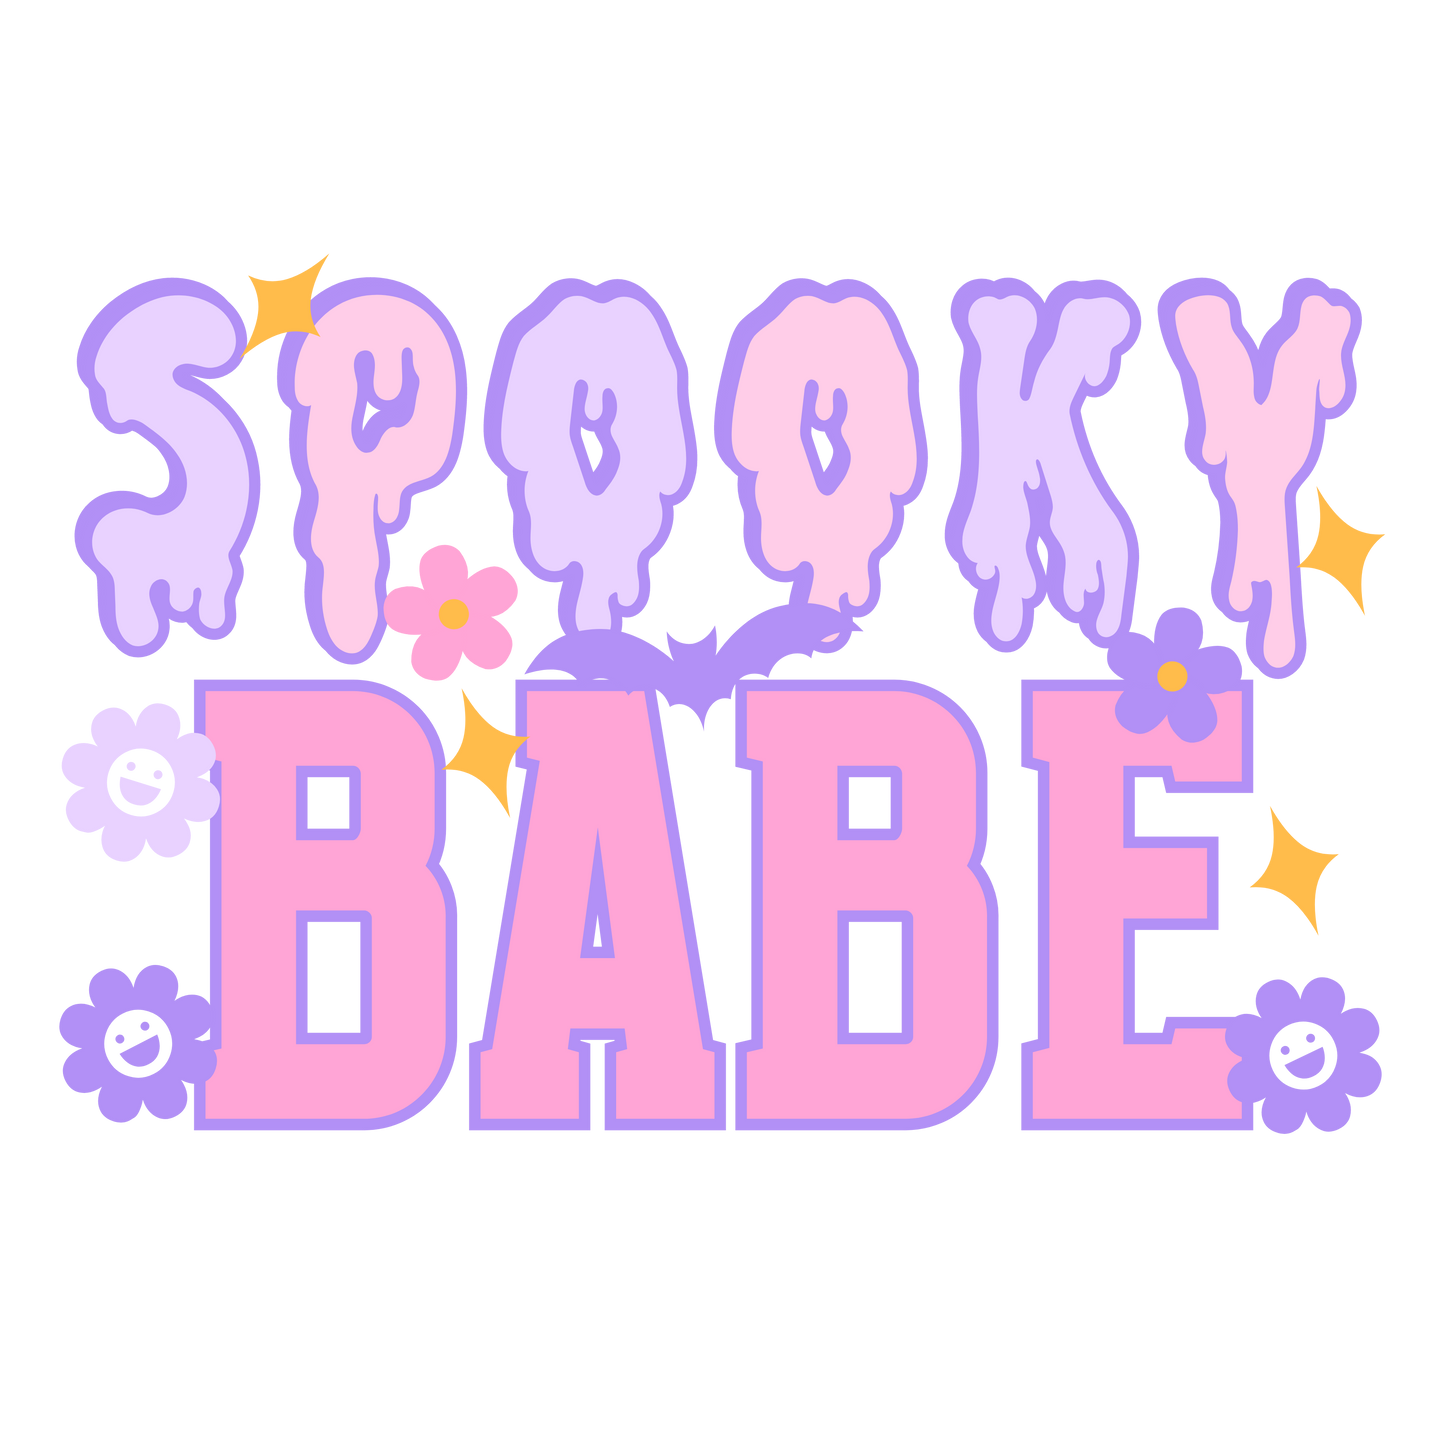 SPOOKY BABE